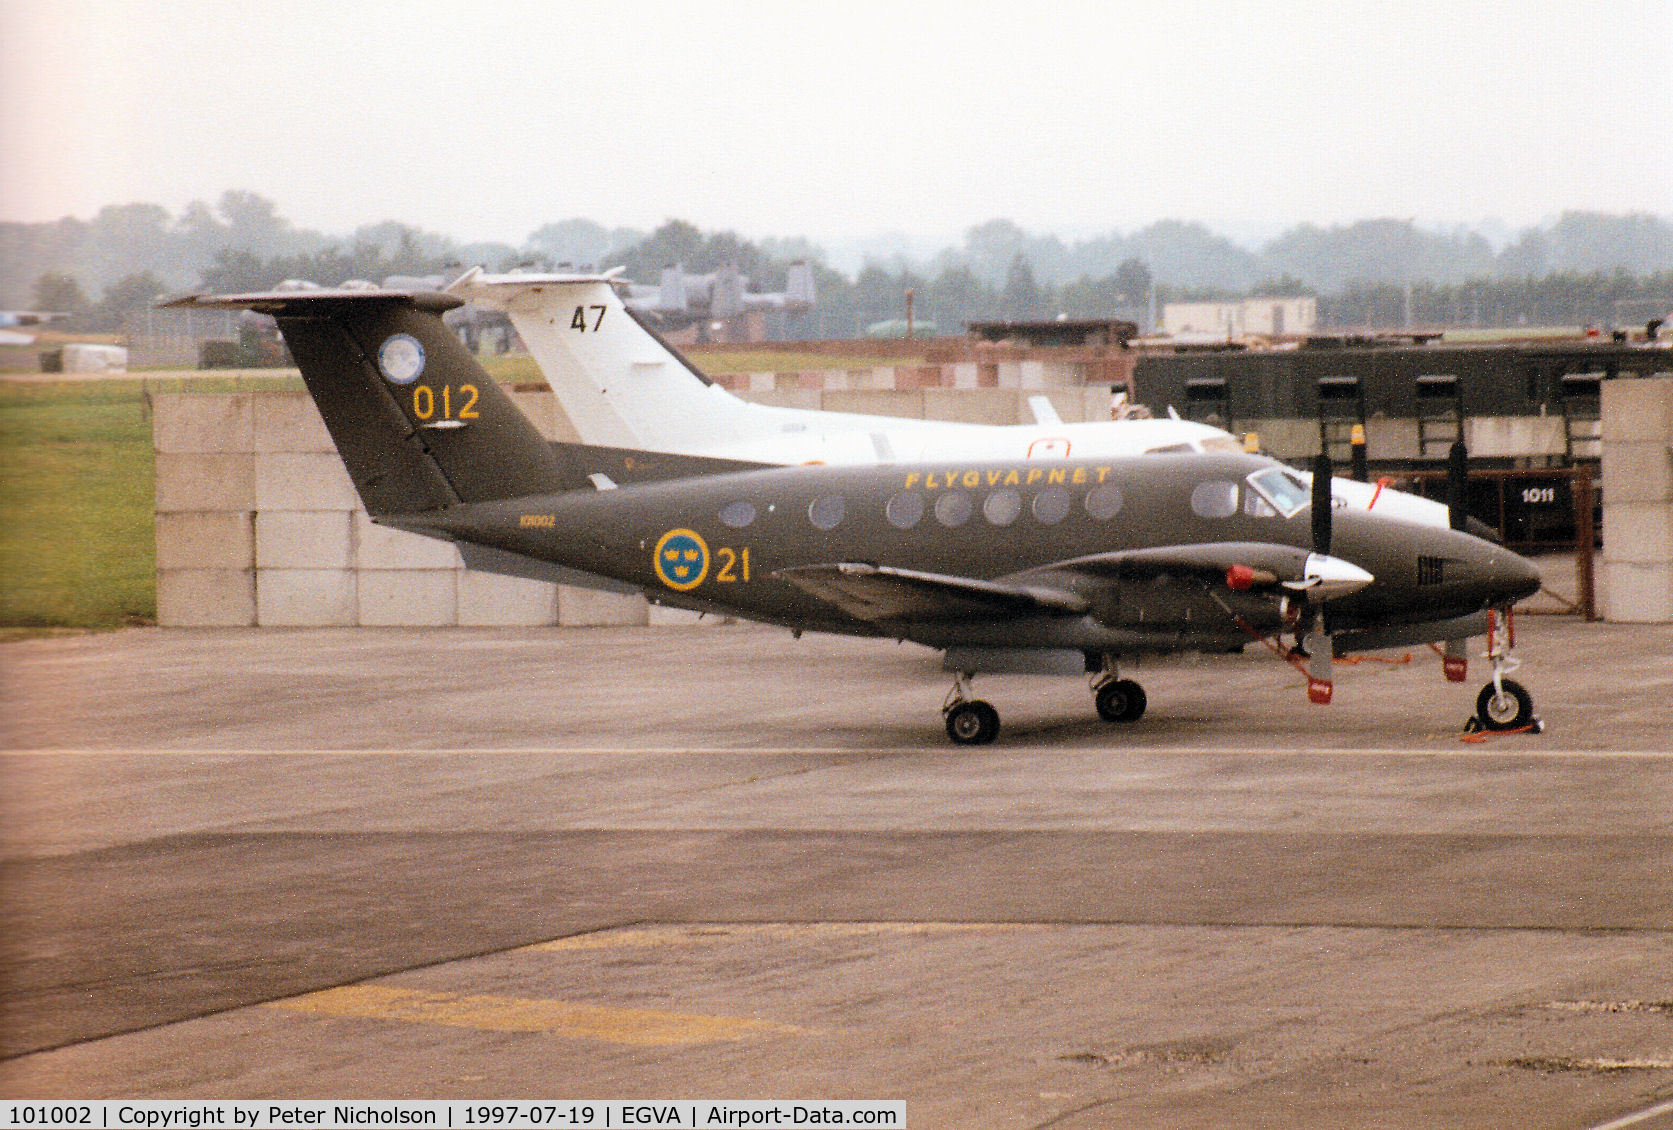 101002, 1979 Beech 200 Super King Air C/N BB-459, Super King Air of F21 Wing Swedish Air Force on the flight-line at the 1997 Intnl Air Tattoo at RAF Fairford.